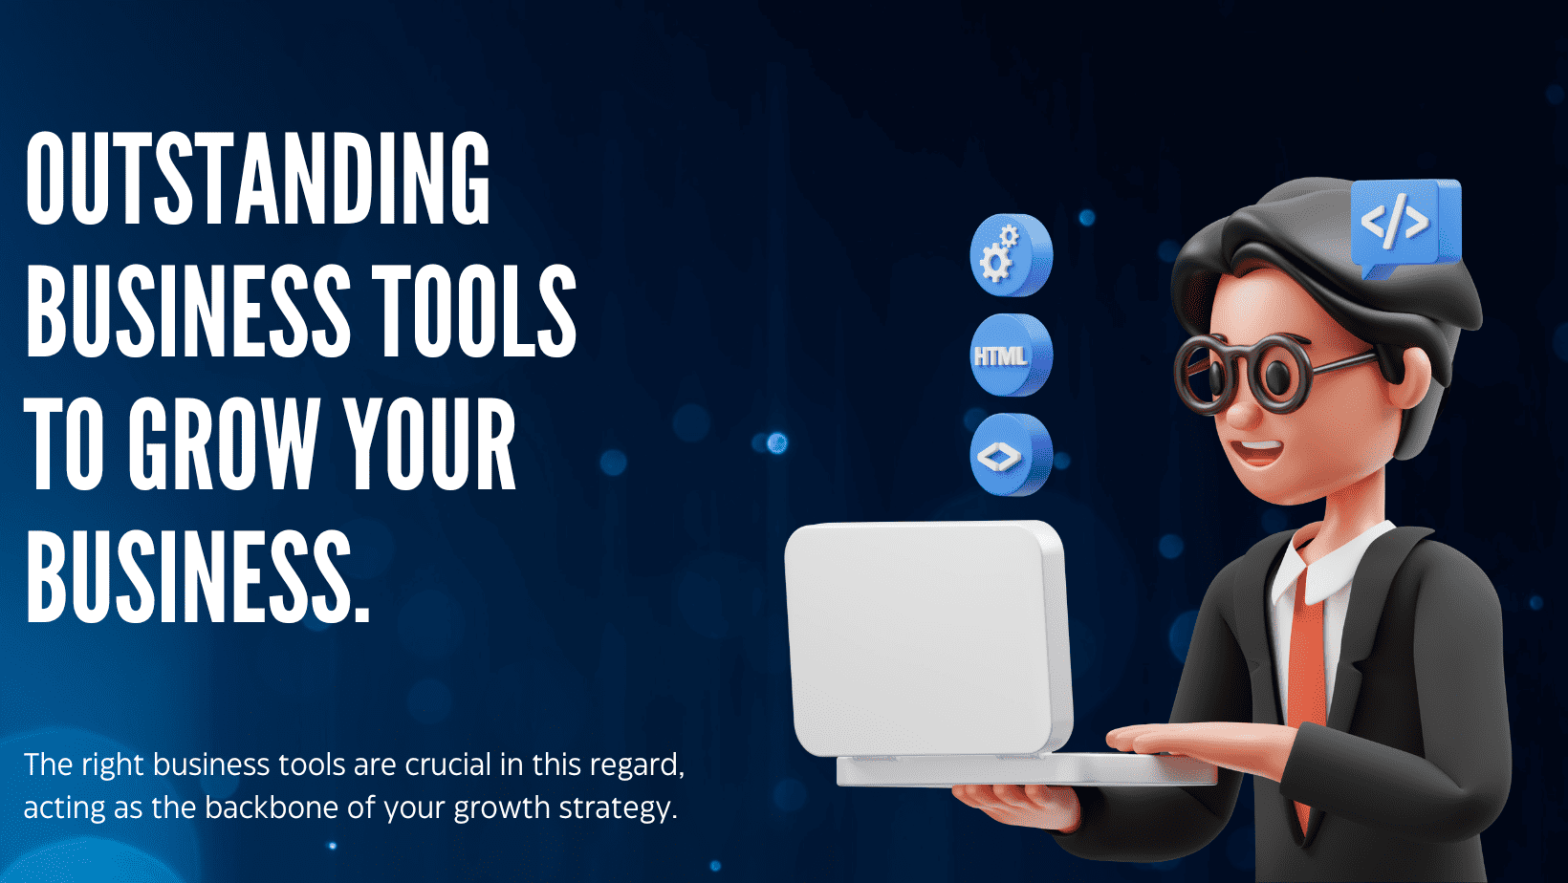 Grow your business consistently with these outstanding business tools.